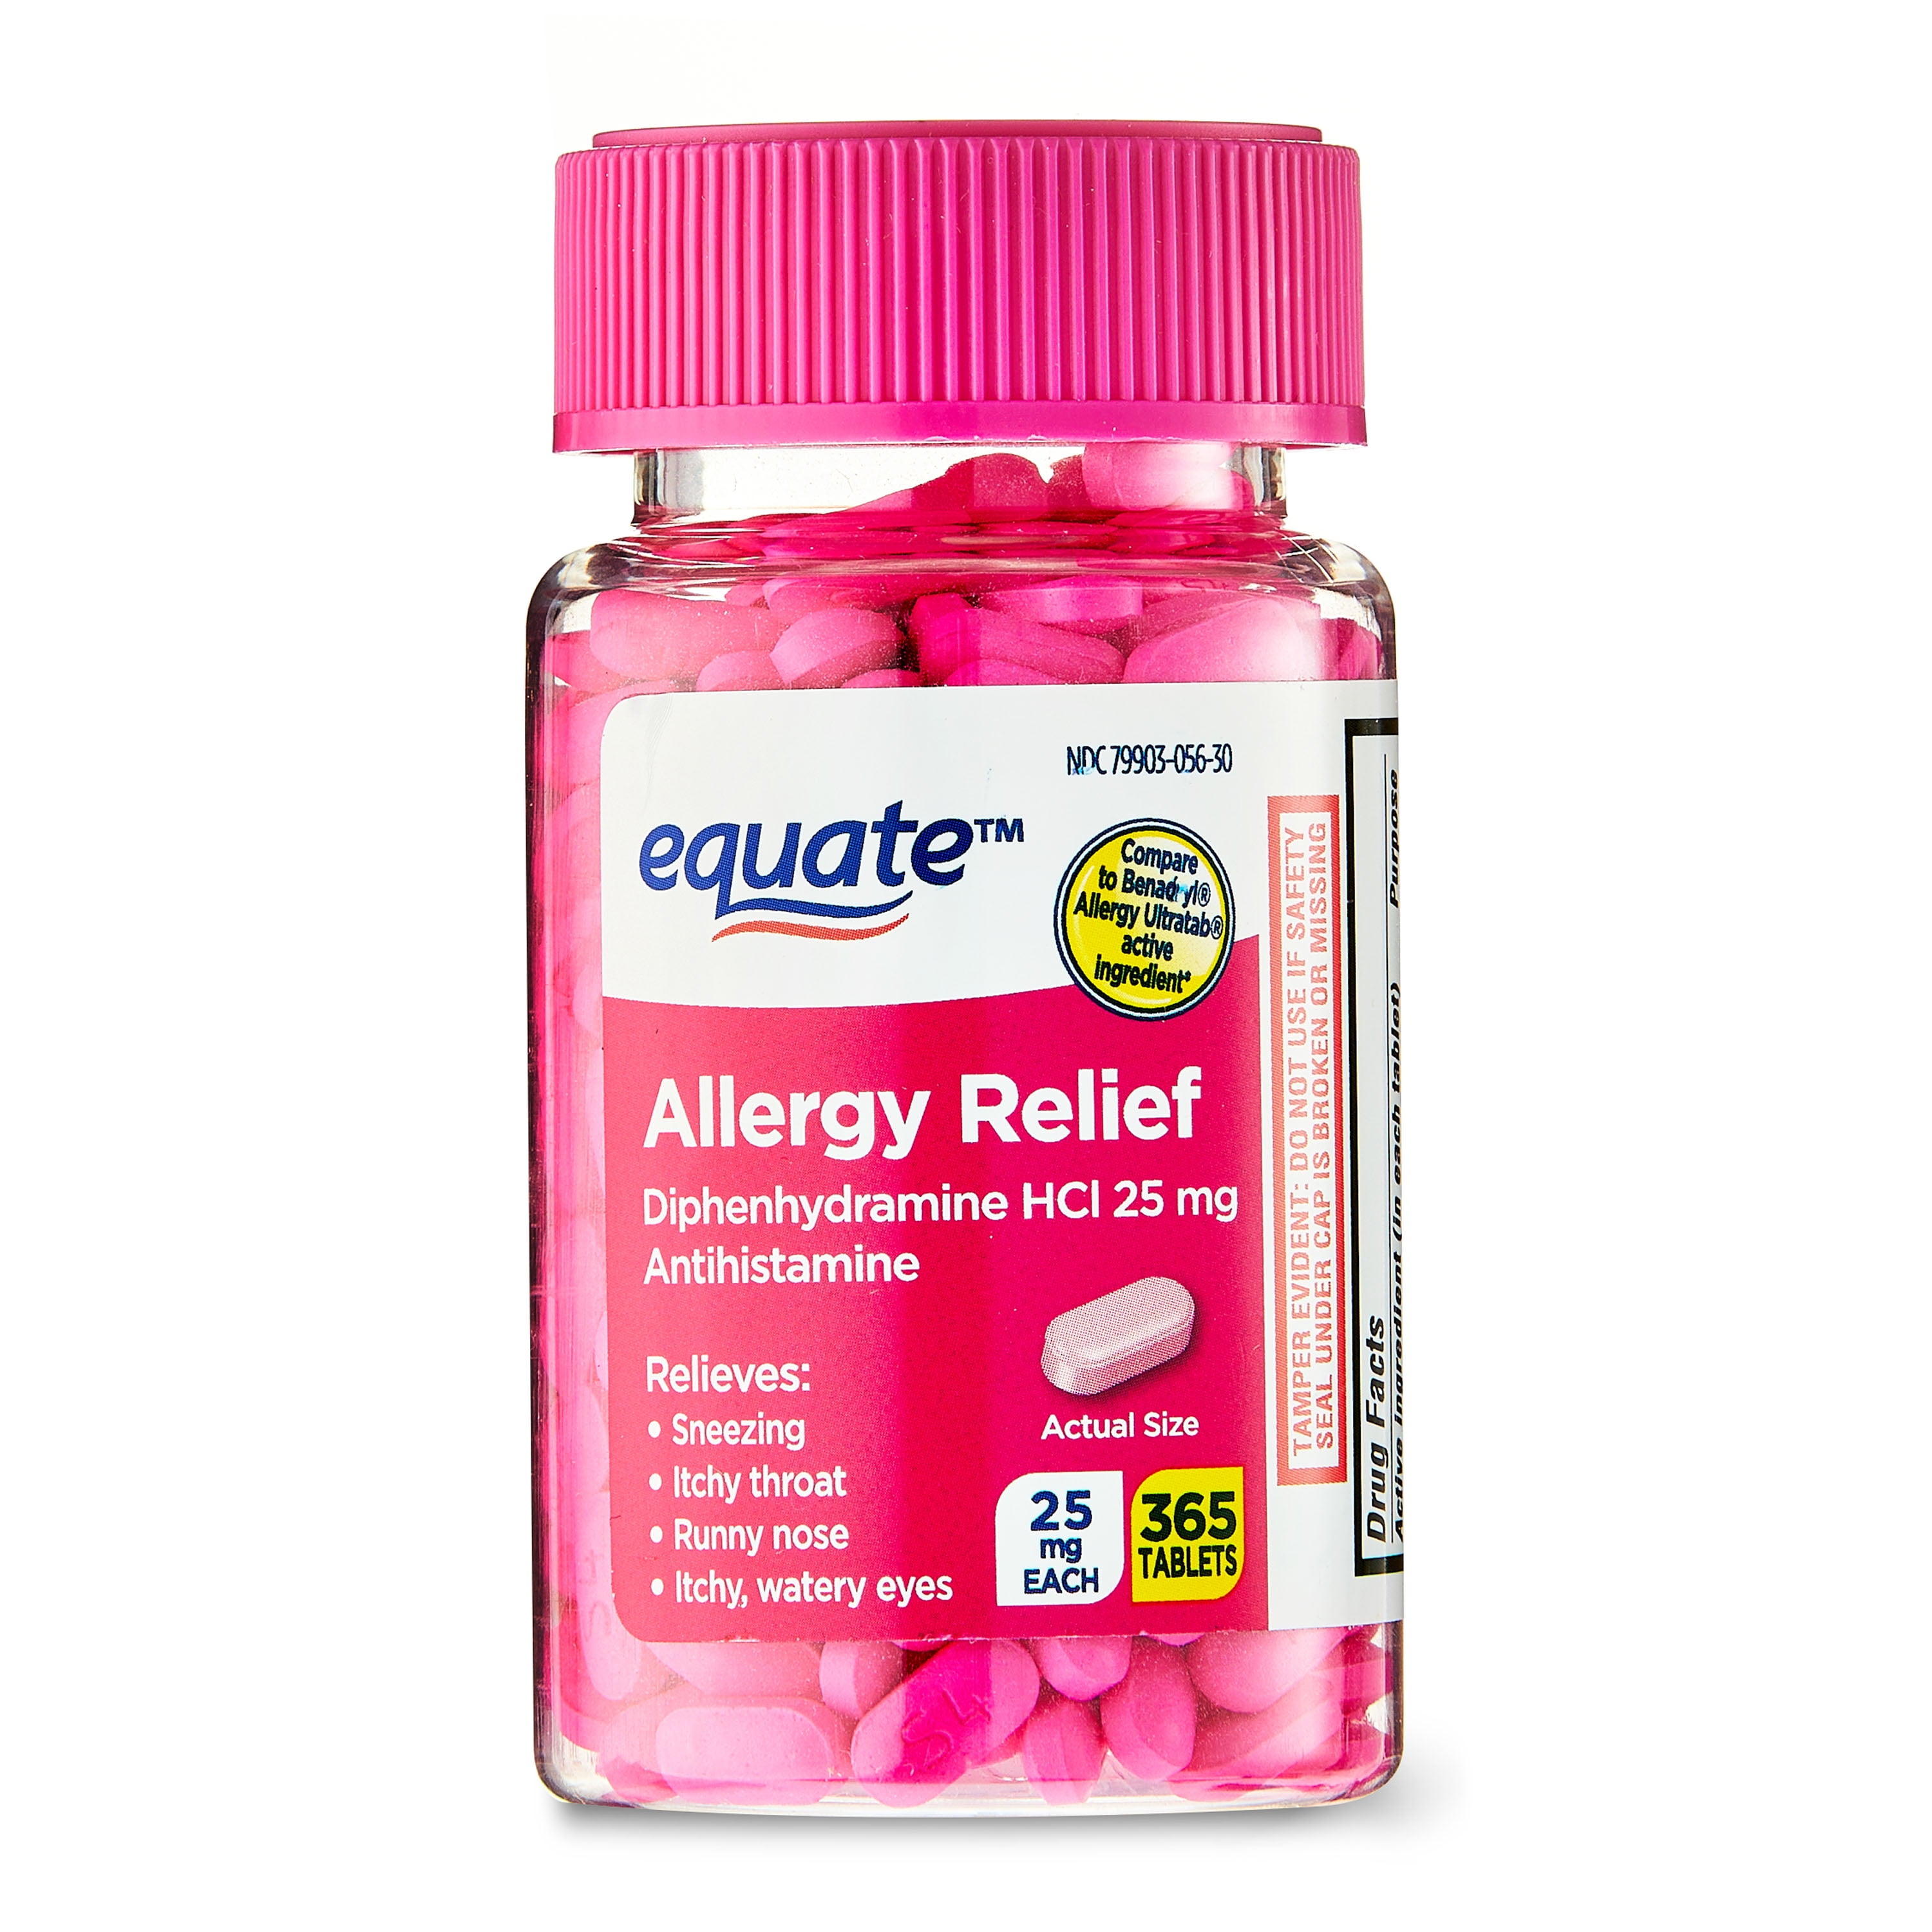 Equate Allergy Relief Tablets with Diphenhydramine Hcl 25mg Antihistamine, 365 Count